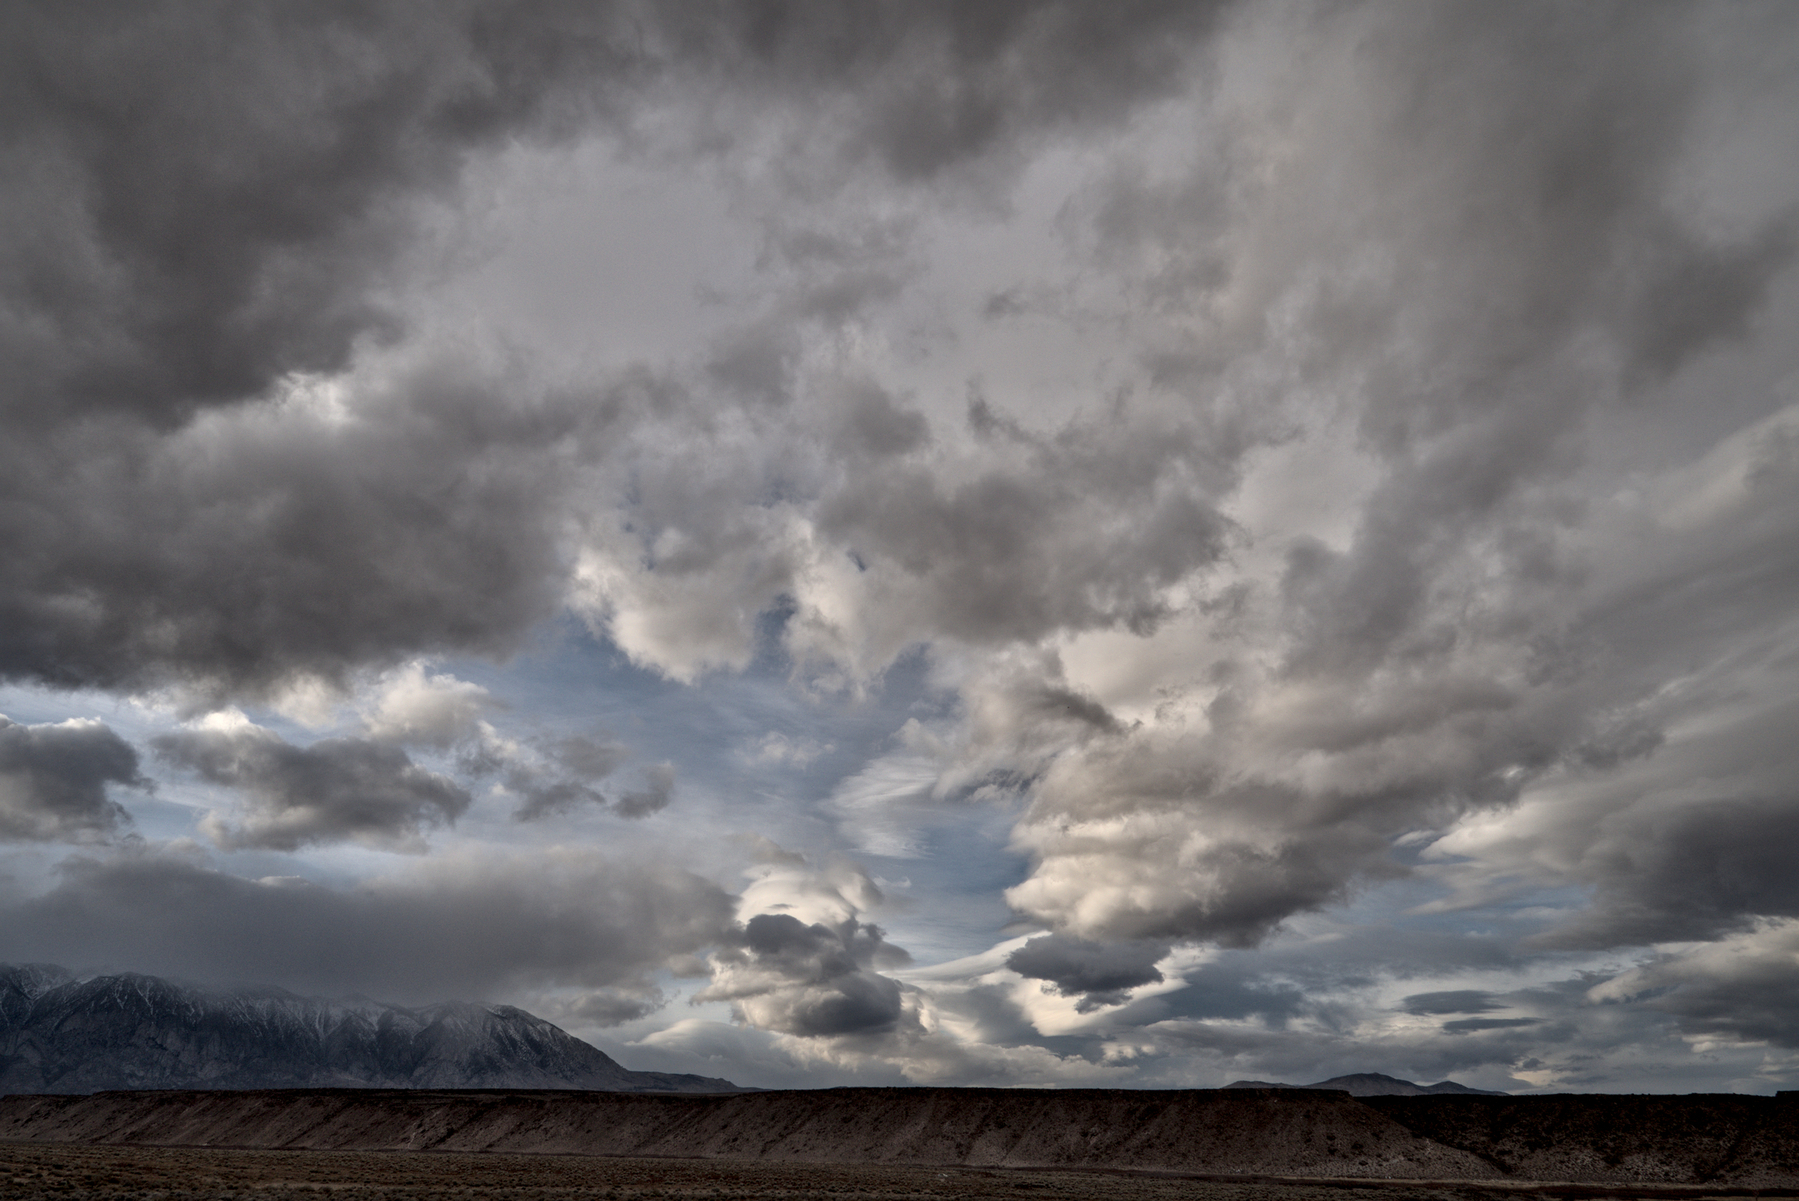 A wide shot of the sky above mountains has many different types of clouds, some white, some grey, with patches of blue sky between.